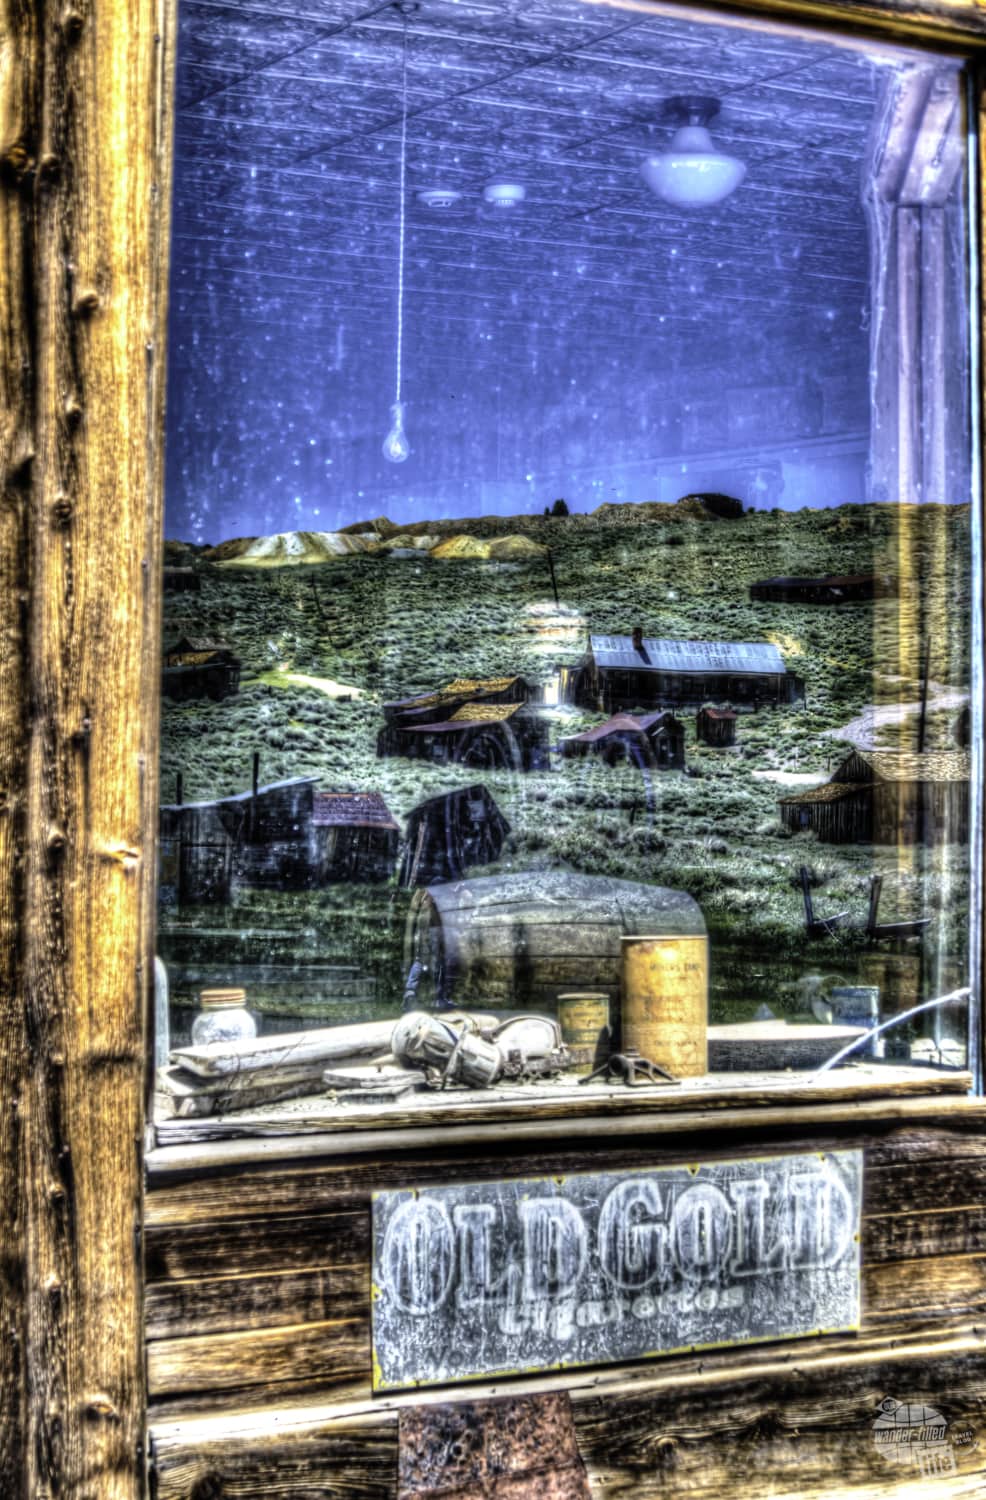 The ghost town of Bodie is just 20 minutes north of Lee Vining.